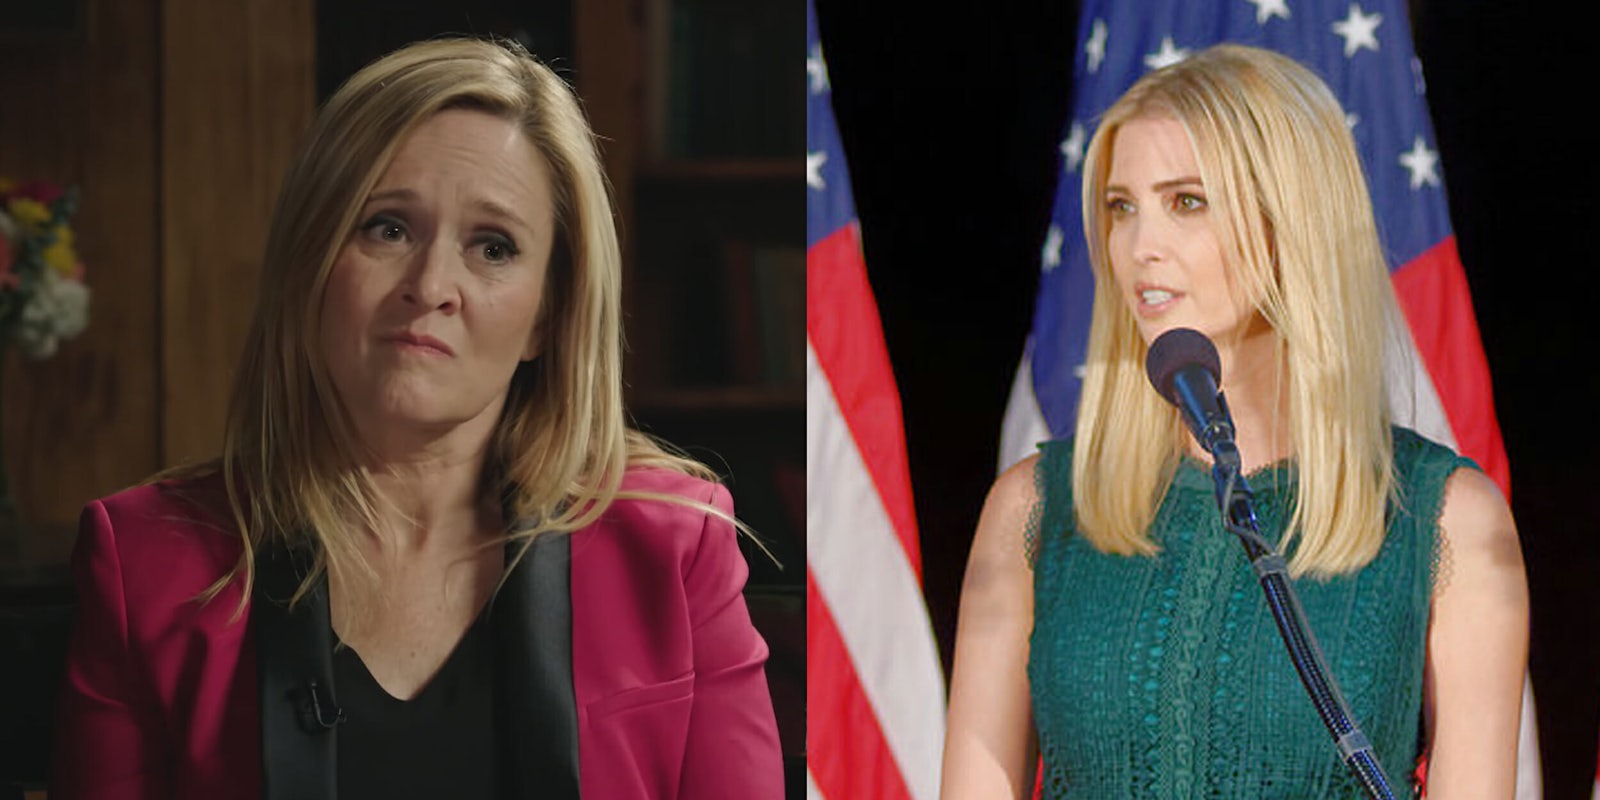 Full Frontal host Samantha Bee had a surprising prediction when asked who should thought would be the first woman president: Ivanka Trump.